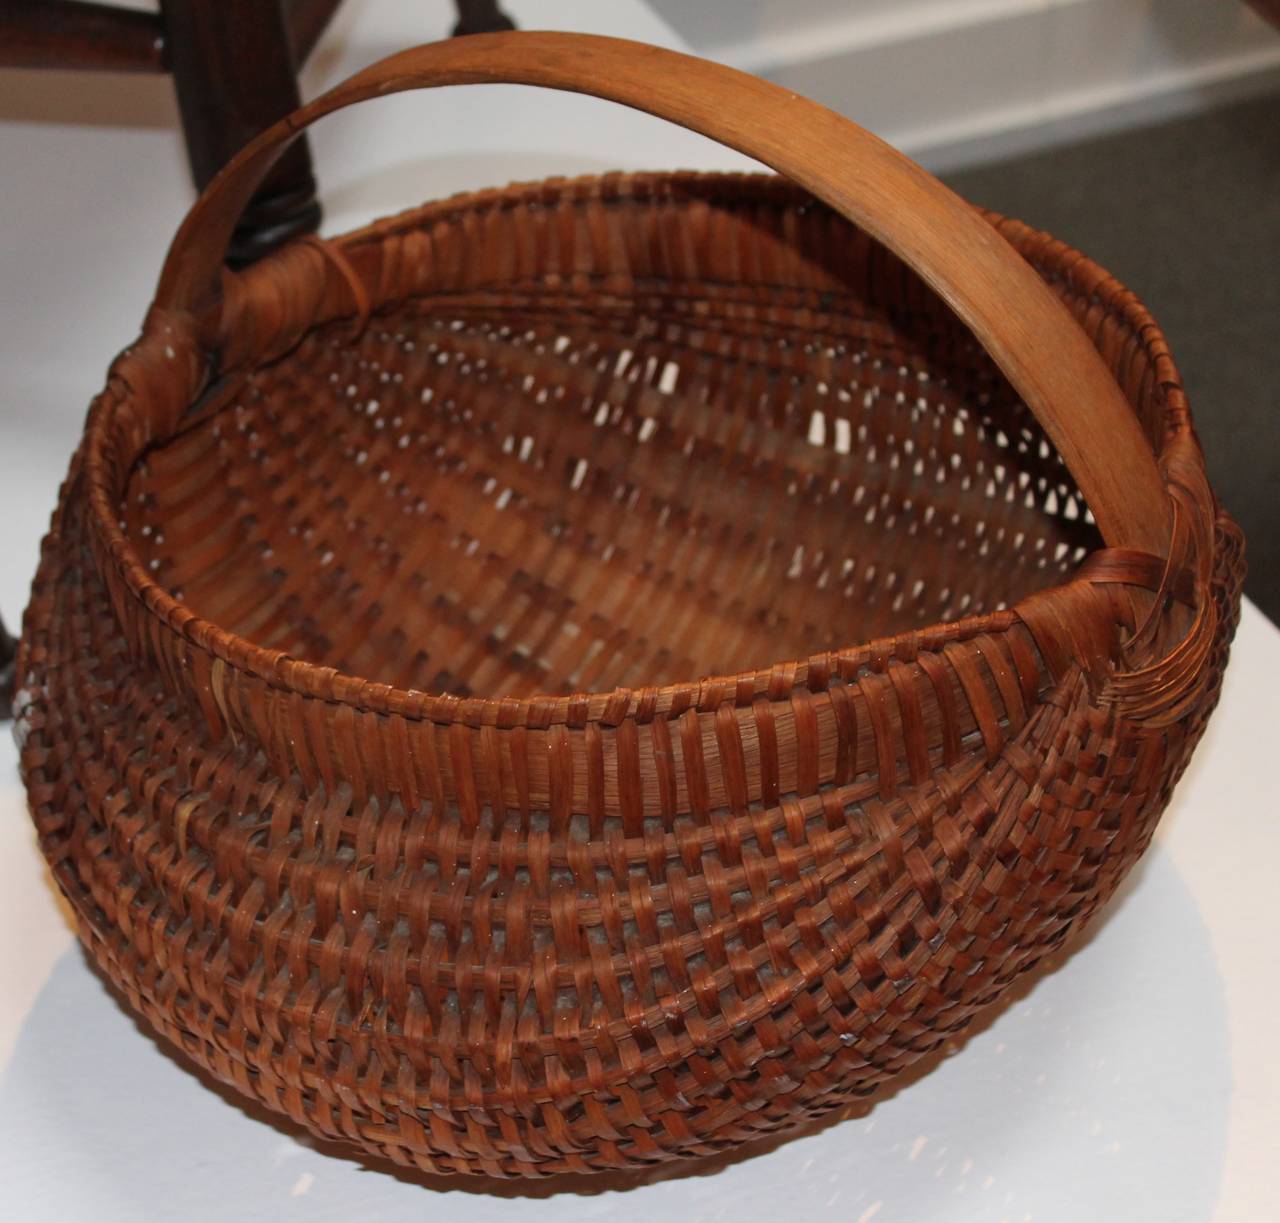 This is quite large hiney basket from the third quarter of the 19th century and in amazing as found condition. It was from a private collection in Pennsylvania. Handmade and woven.